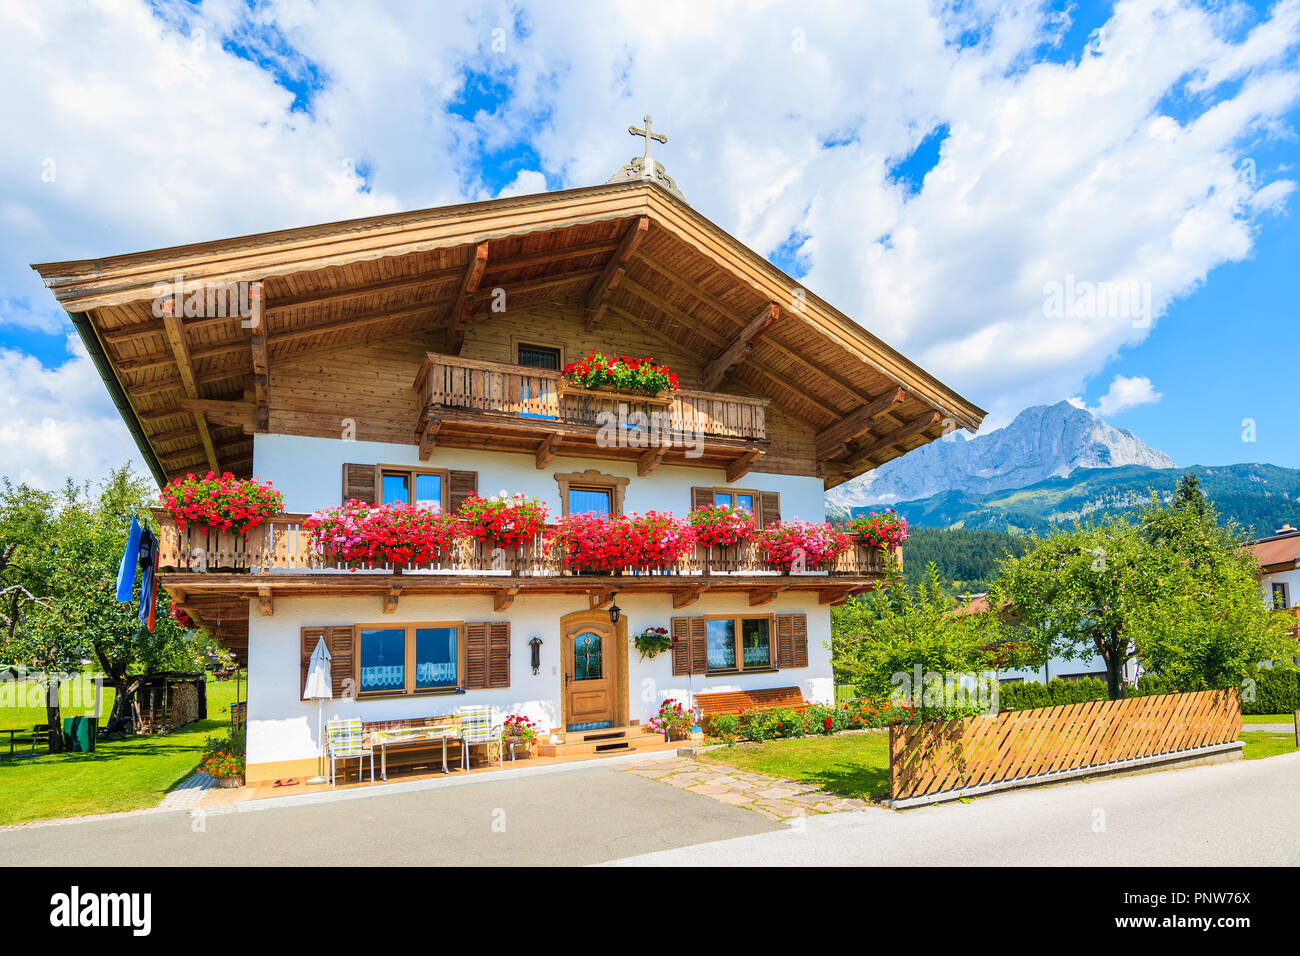 Traditional alpine house with balconies decorated with flowers in Going am Wilden Kaiser mountain village, Kitzbuhel Alps, Austria Stock Photo